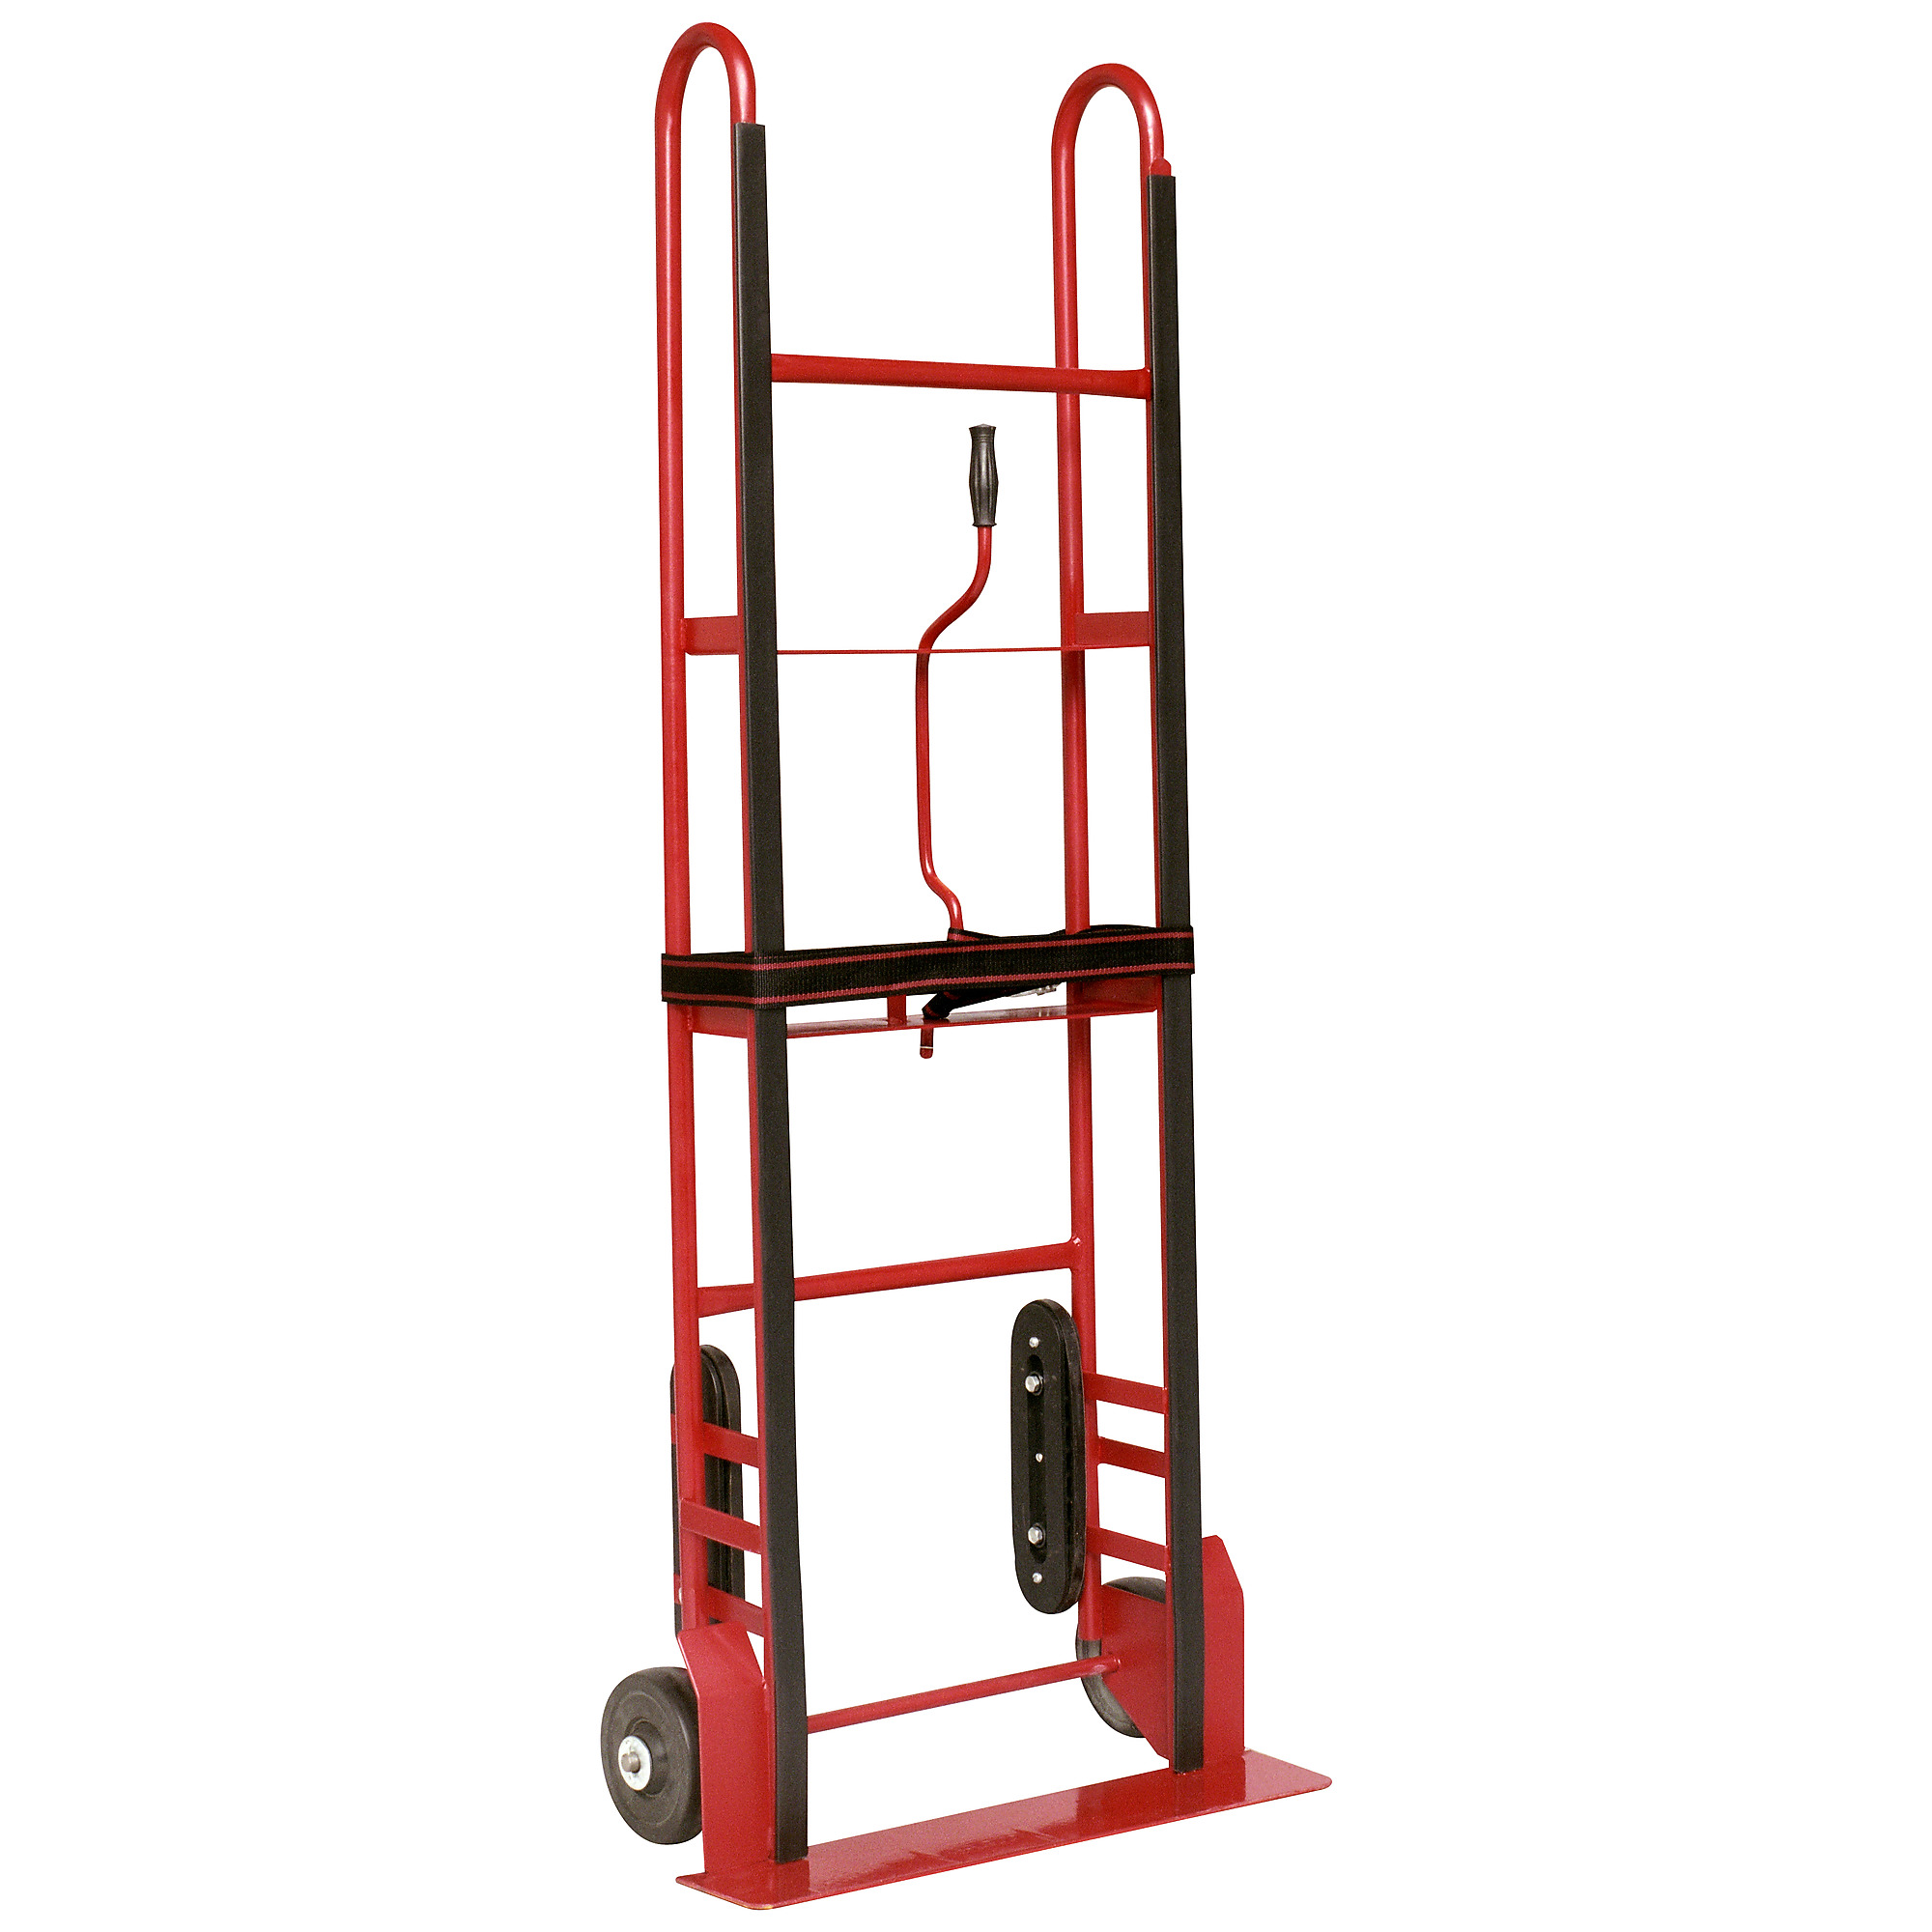 American Power Pull, Appliance Dolly, Capacity 550 lb, Frame Material Steel, Single, Pair, or Set Single, Model 3500